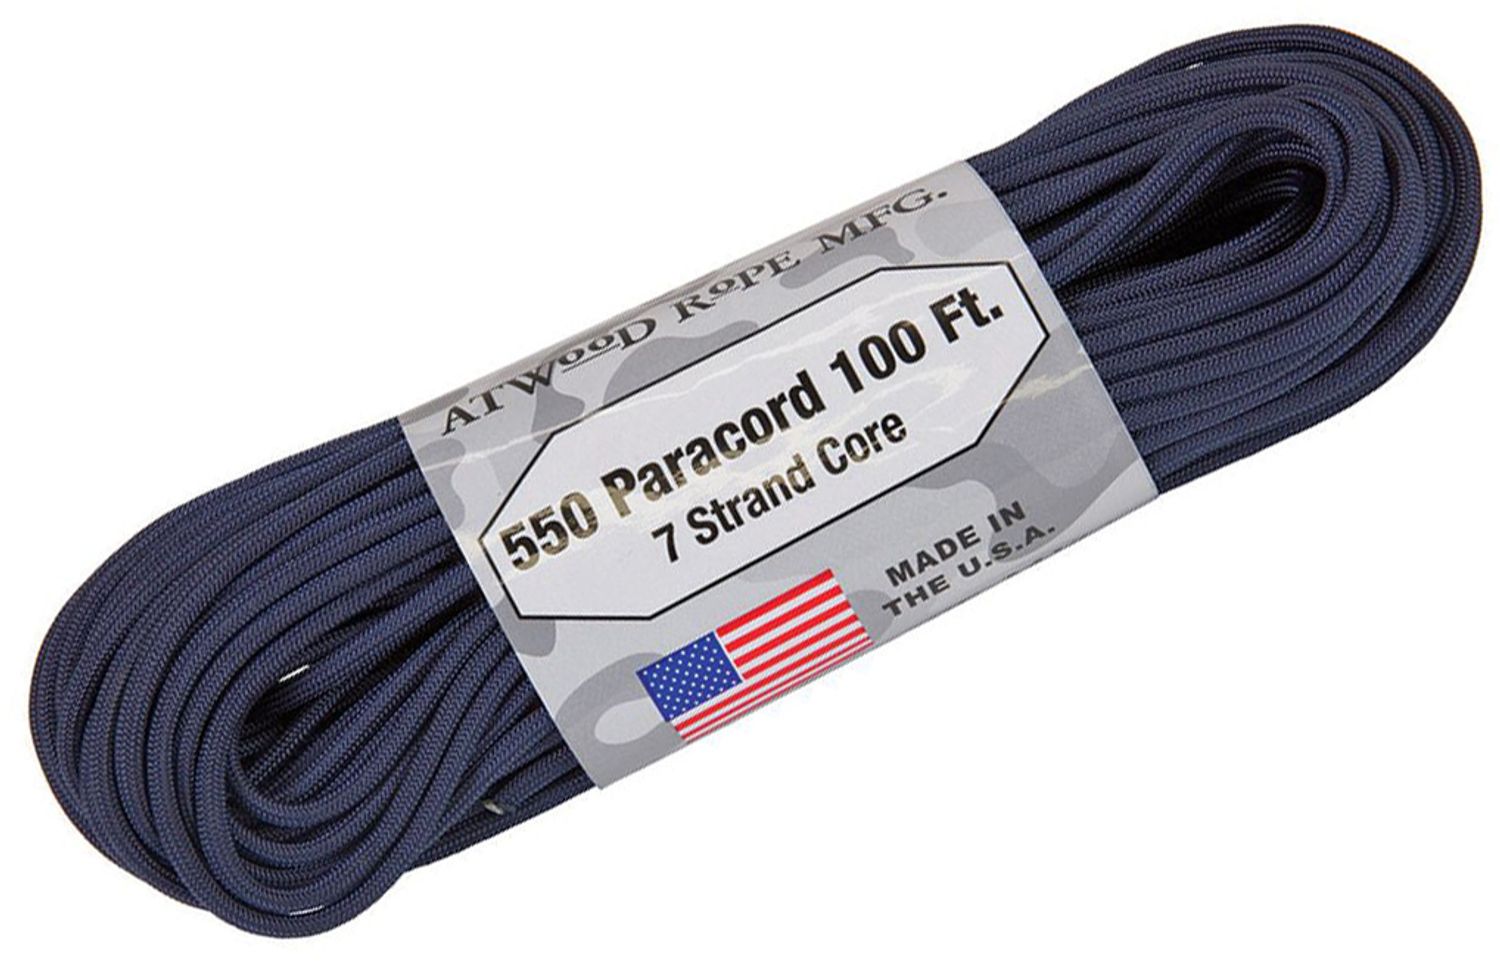 Atwood Rope 550 Paracord, Navy, 100 Feet - KnifeCenter - RG1221H